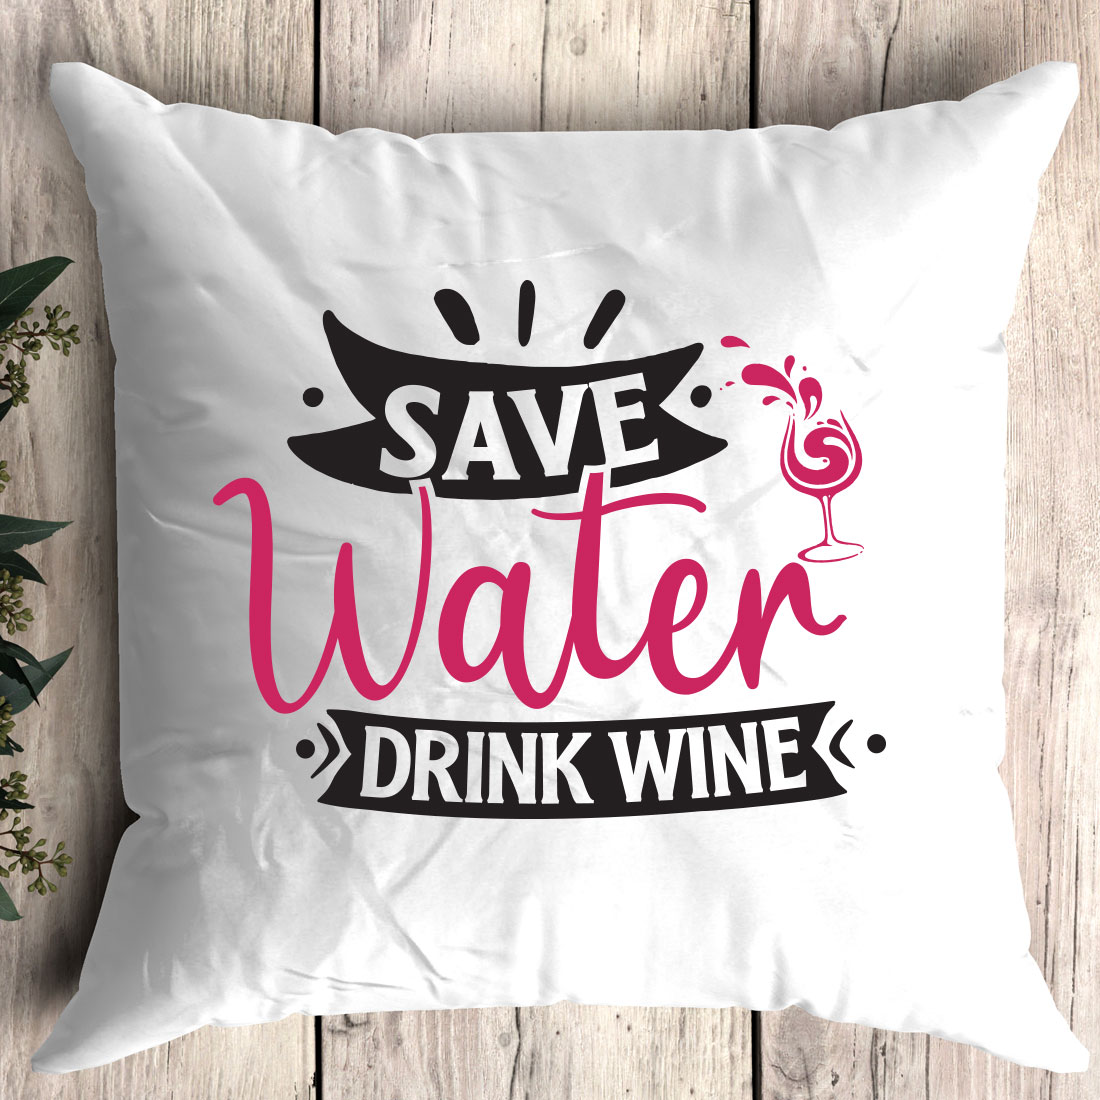 Pillow that says save water drink wine.